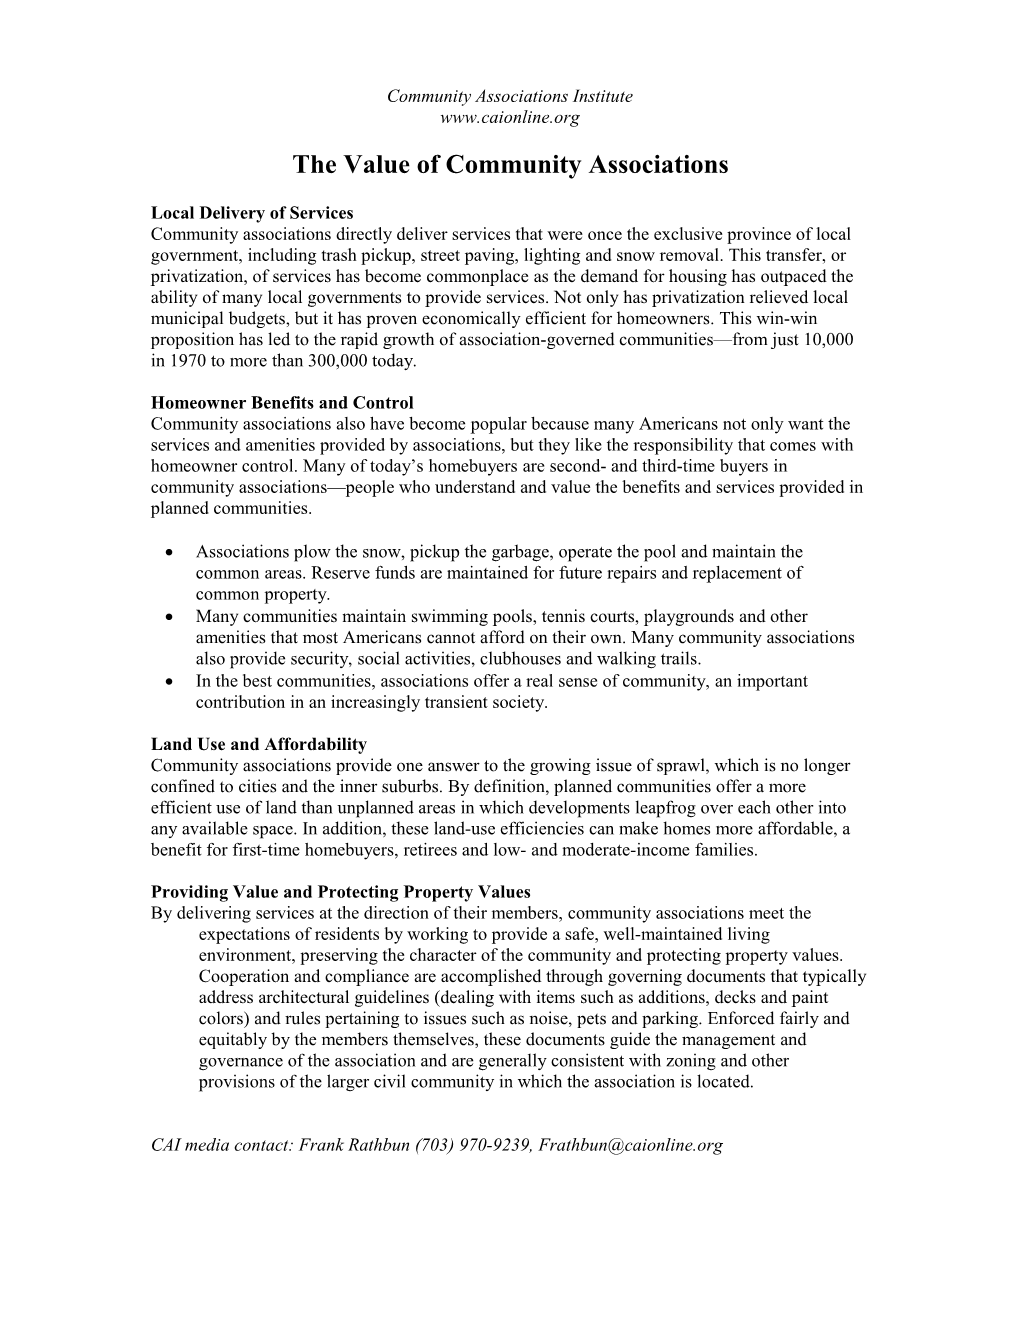 The Value of Community Associations